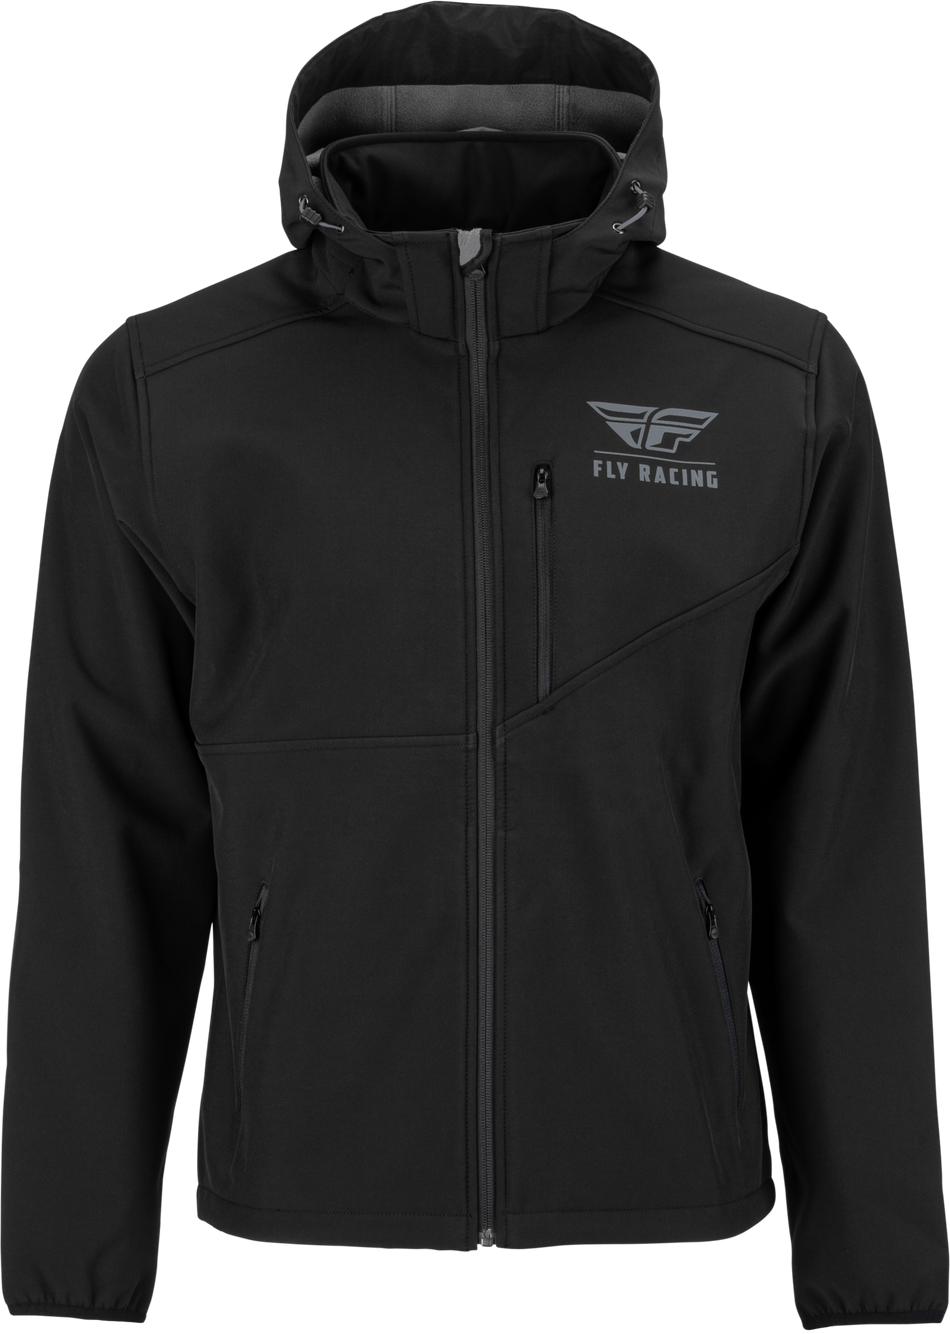 FLY RACING Checkpoint Jacket Black 3x 354-63833X